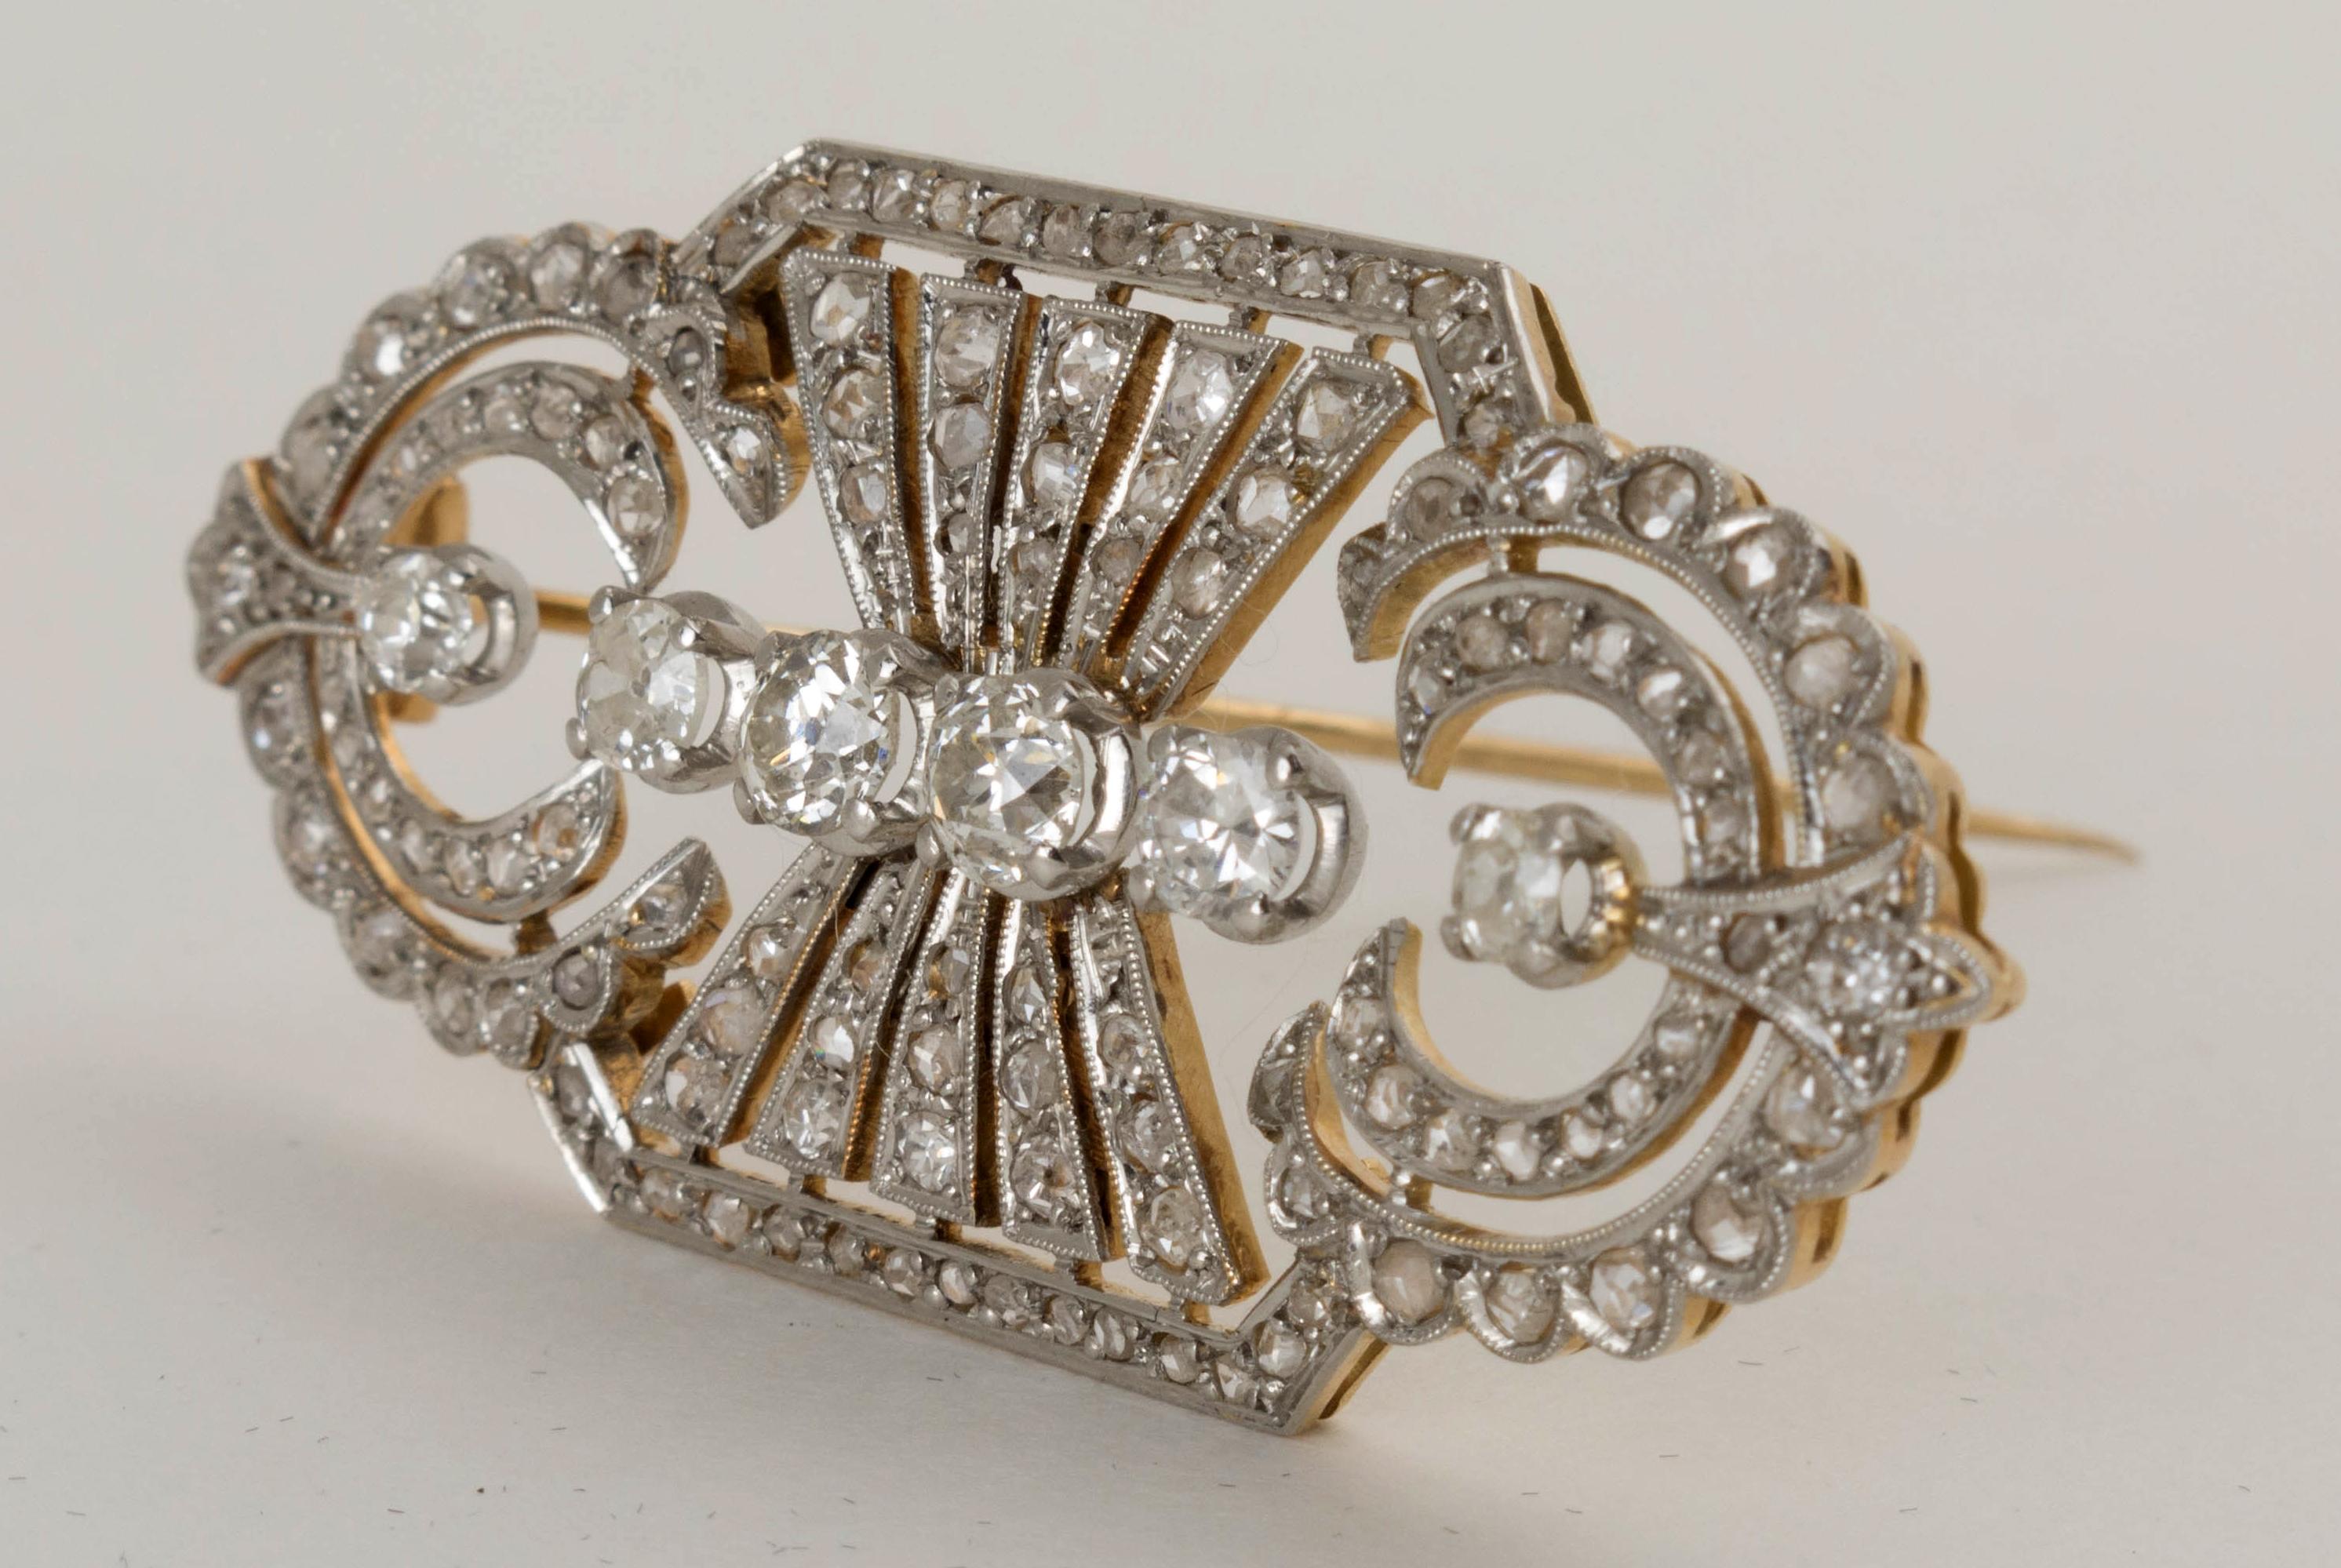 An absolutely stunning English Art Deco diamond brooch set in 18k yellow gold and topped with platinum, circa 1930's.

The brooch of classic Art Deco design with an overall rectangular shape, the shorter ends rounded, and formed as concentric